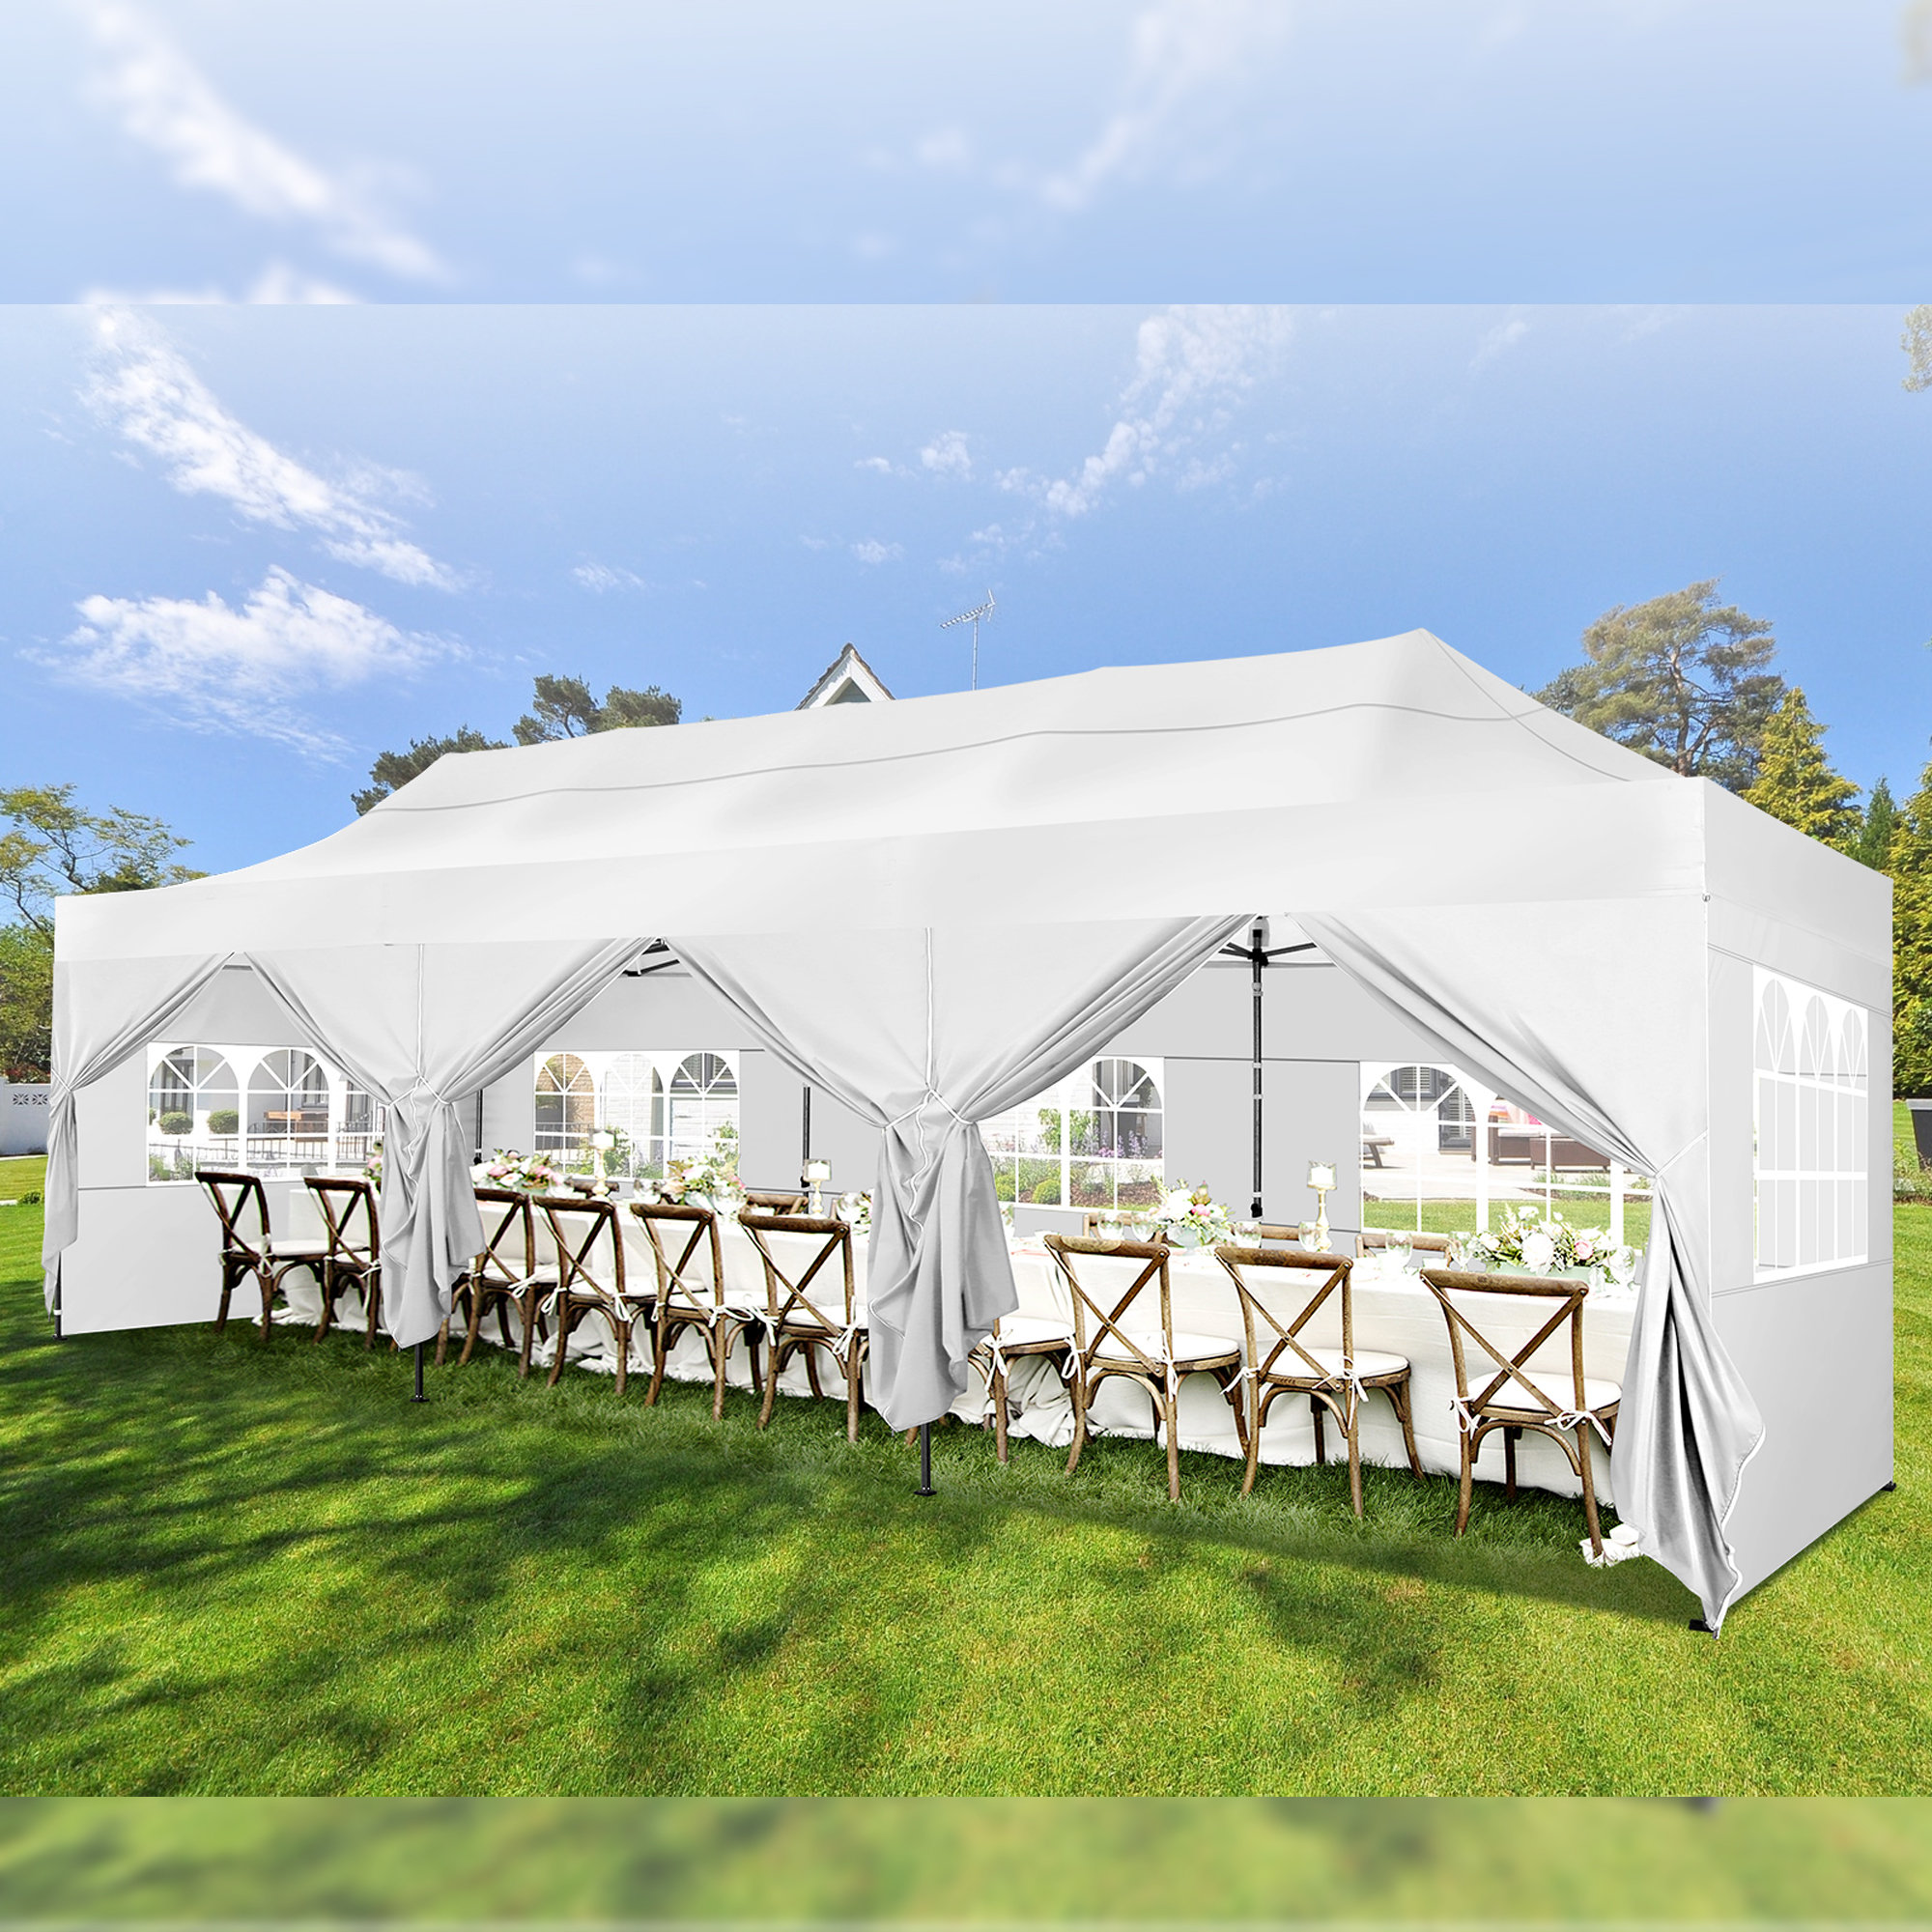 10 ft. x 10 ft. 5-Pieces Red Pop Up Sidewall Canopy Tent of